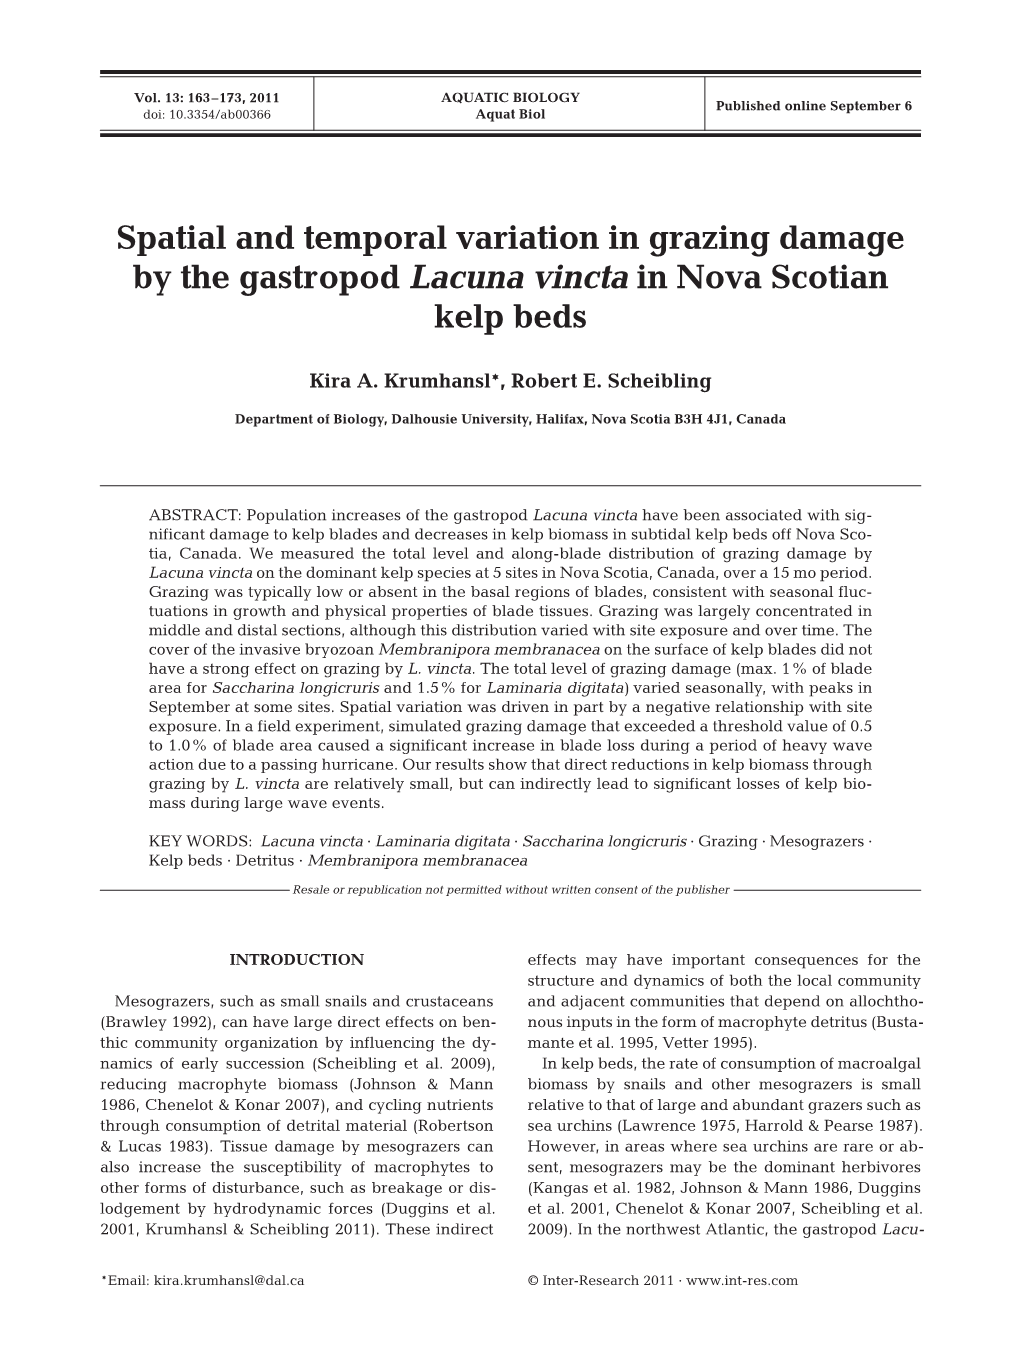 Spatial and Temporal Variation in Grazing Damage by the Gastropod Lacuna Vincta in Nova Scotian Kelp Beds